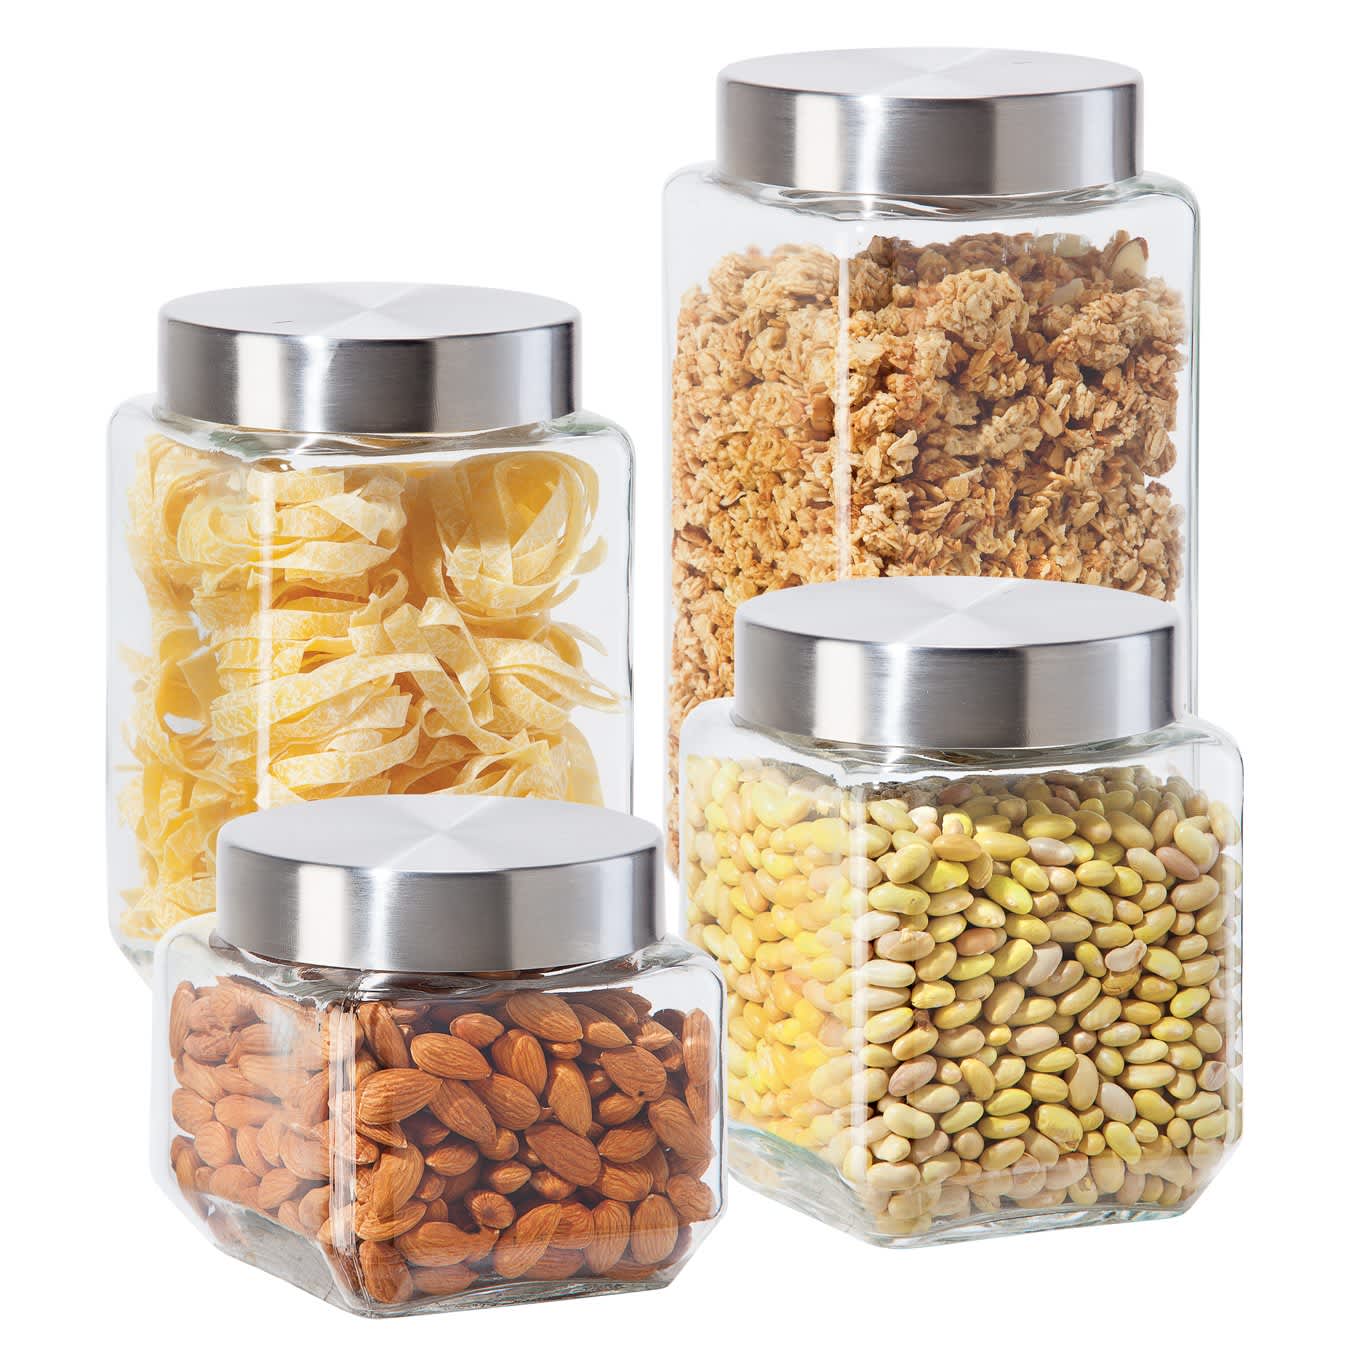 http://cdn.apartmenttherapy.info/image/upload/v1674859444/gen-workflow/product-database/oggi-4-piece-airtight-glass-storage-containers-amazon.jpg